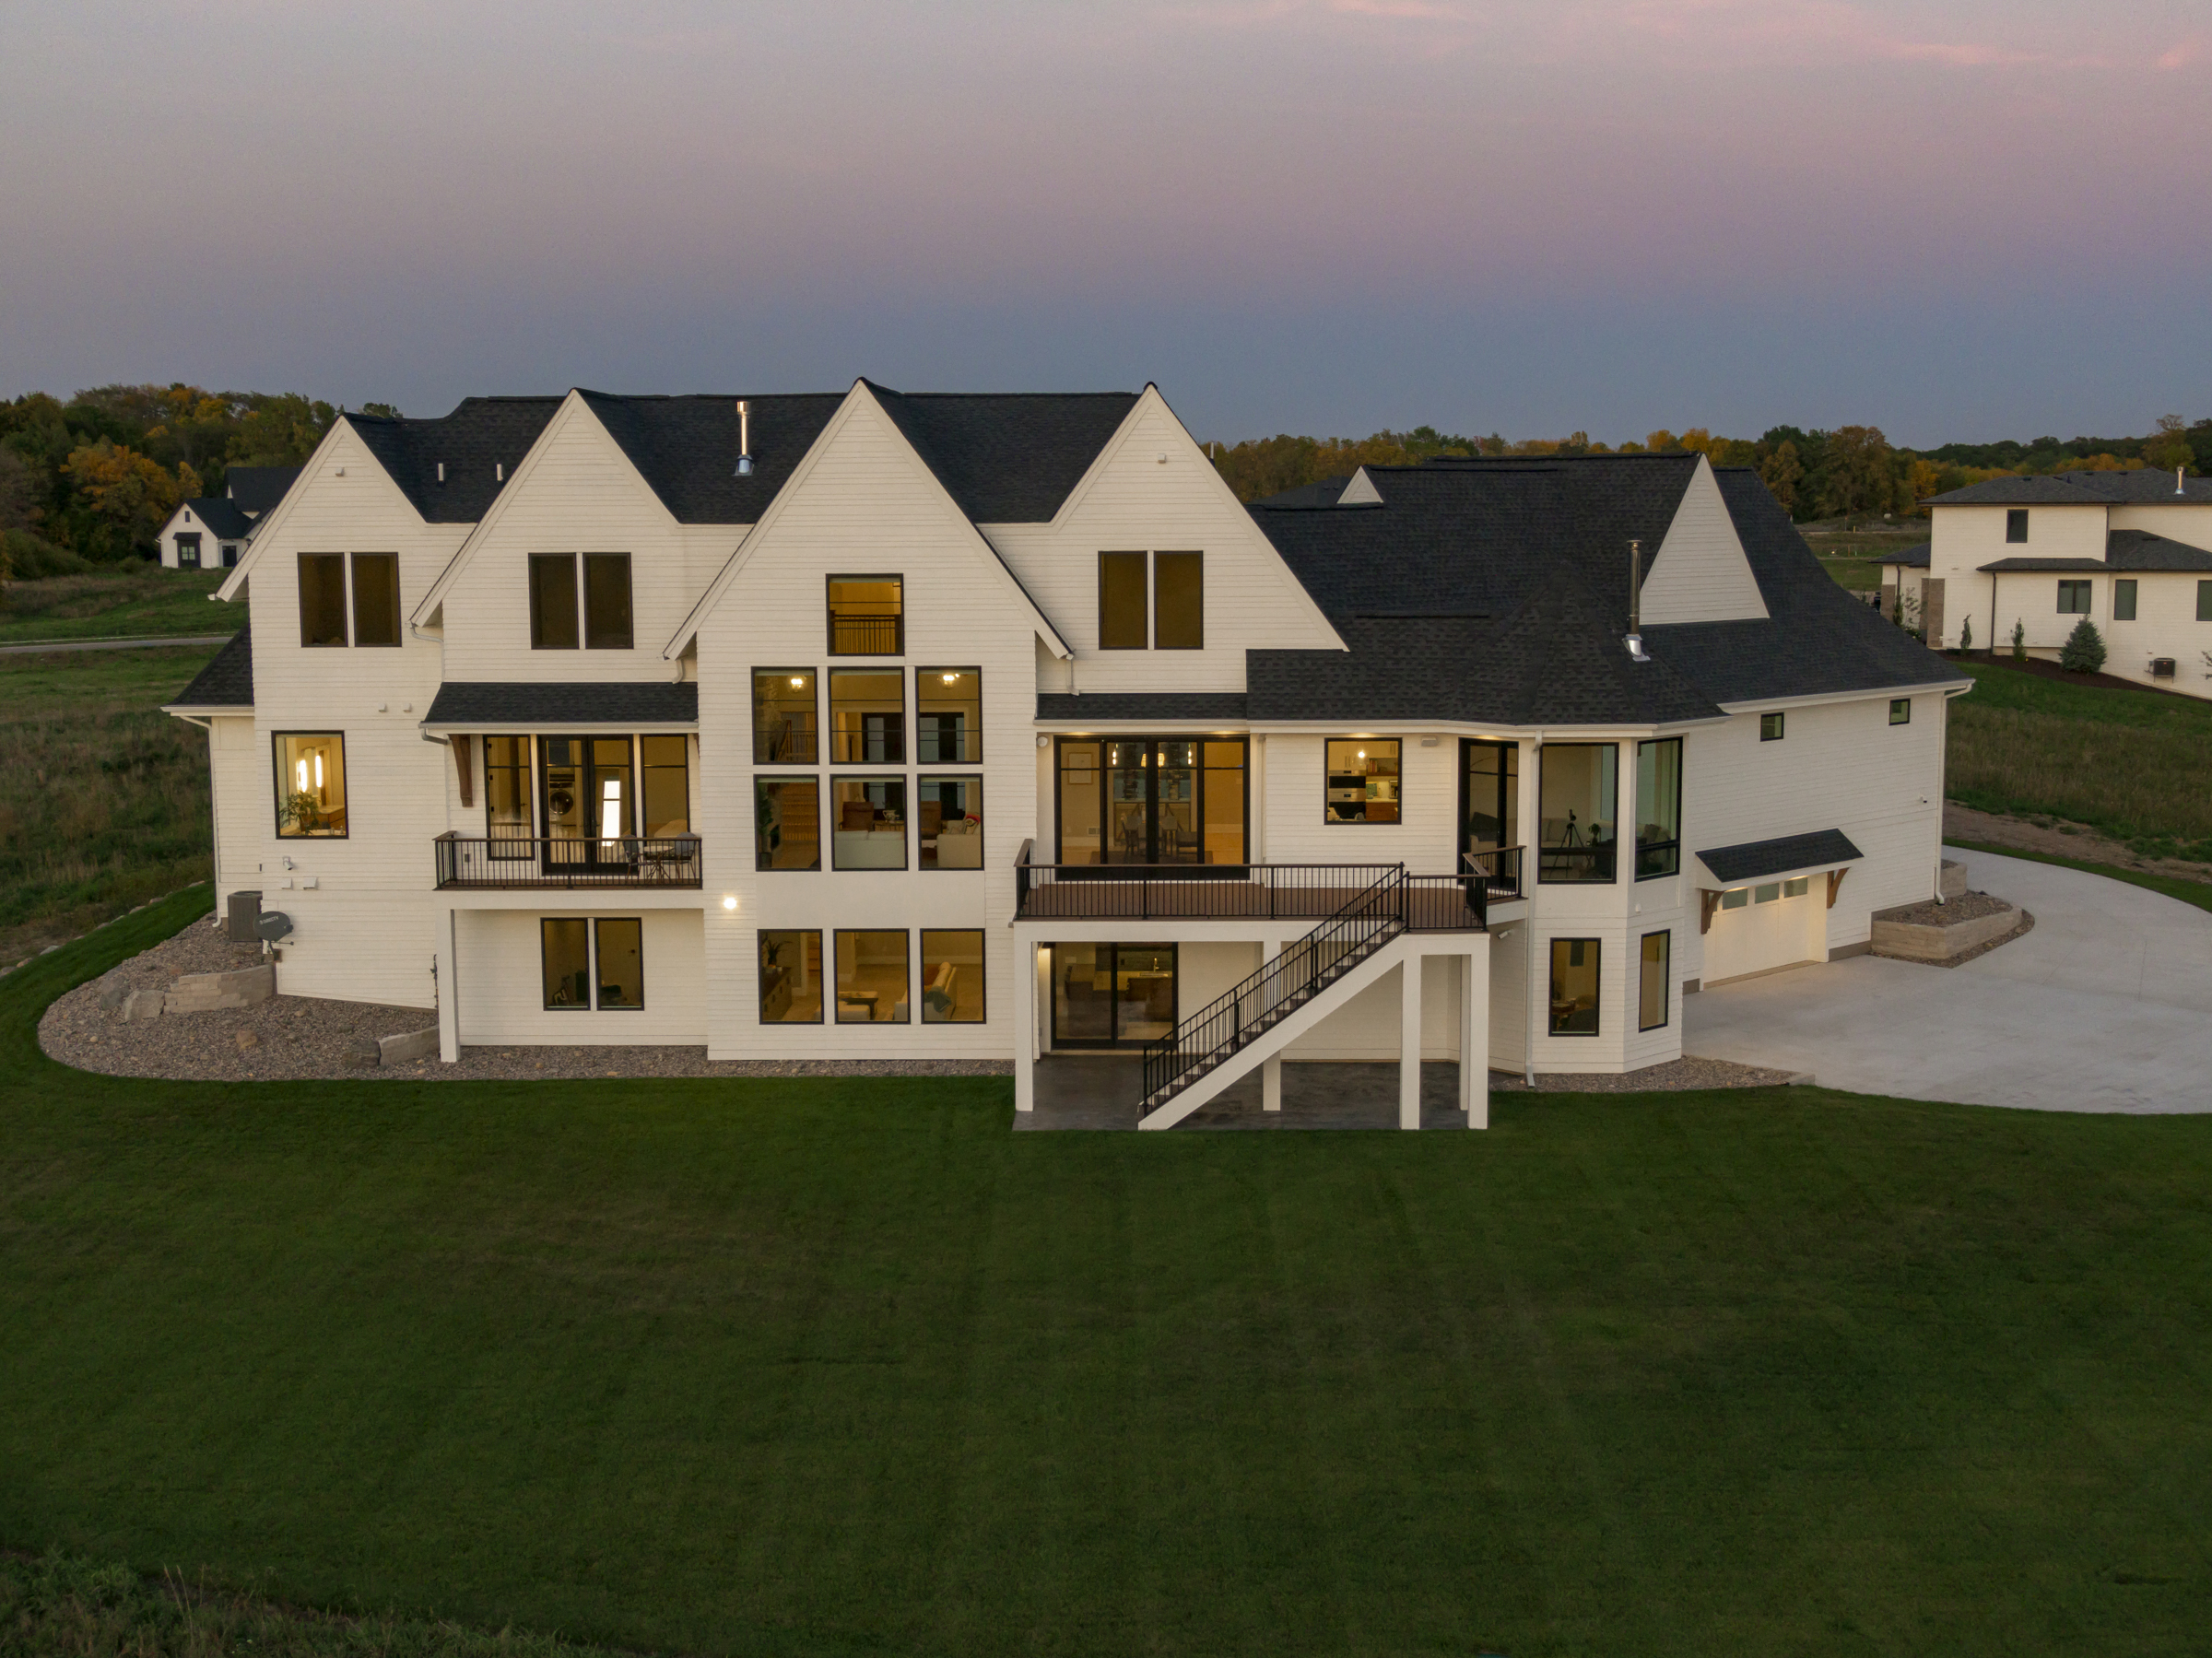 An aerial view of a prairie transitional custom home in the countryside.